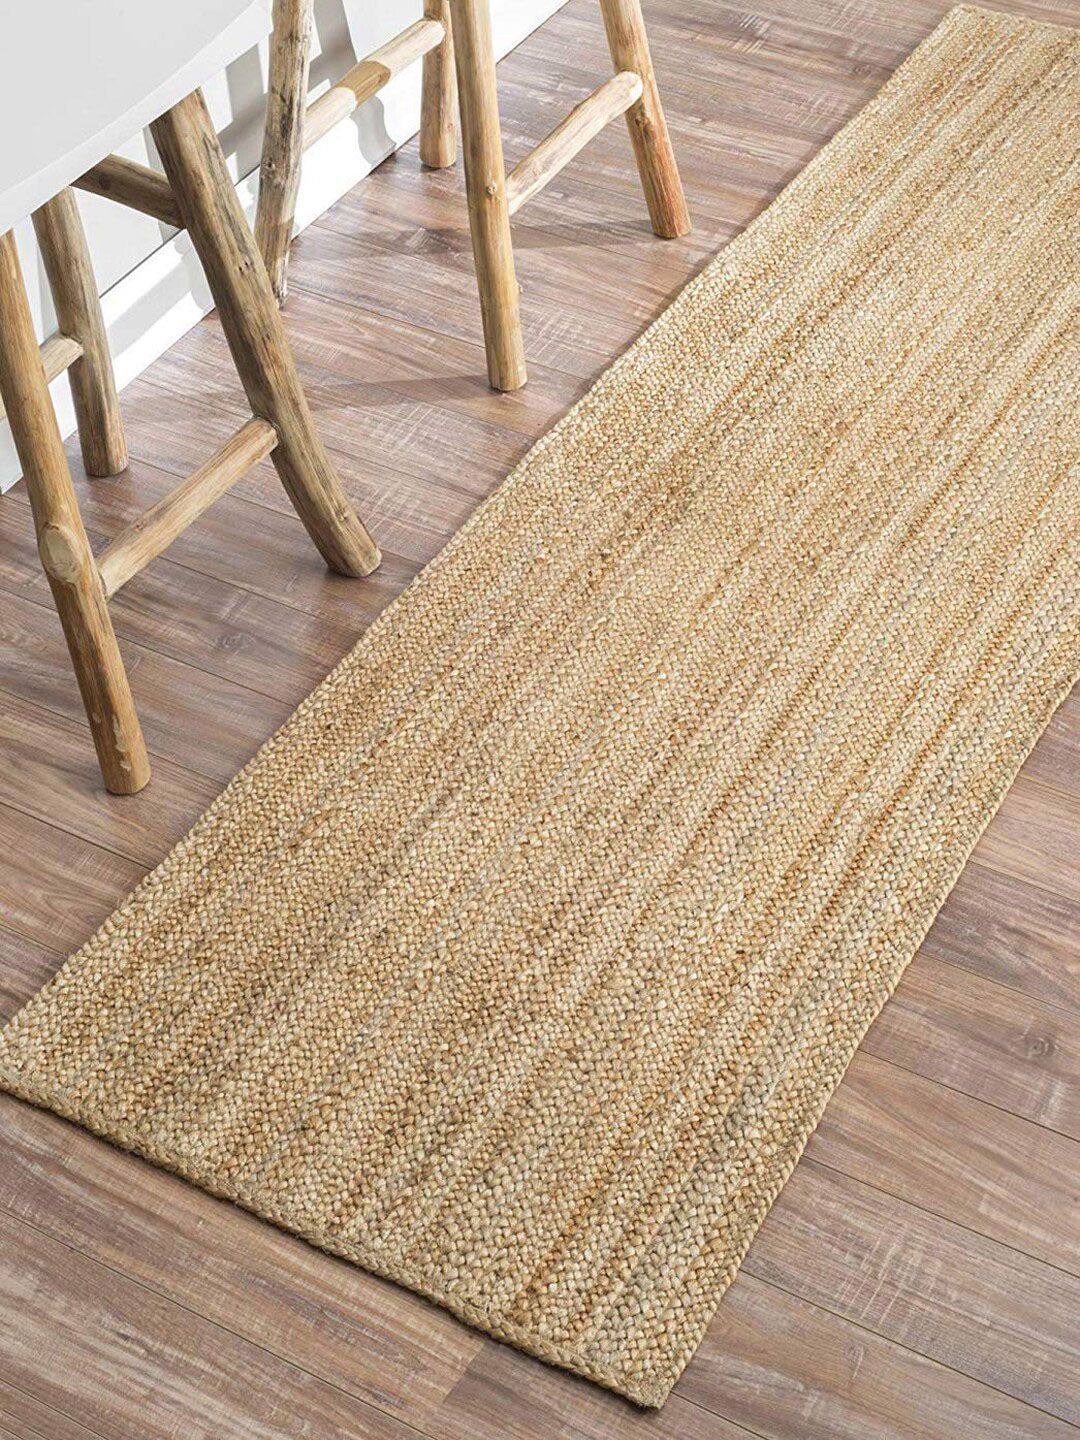 HABERE INDIA Beige Solid Hand Woven Jute Carpets Price in India